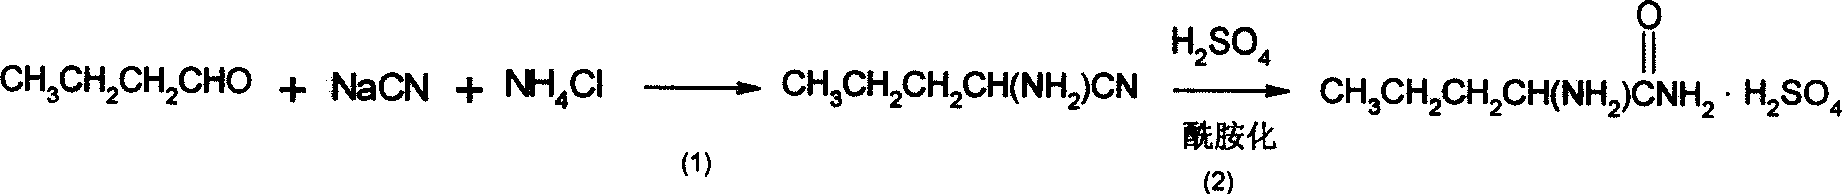 Synthesis method of chiral norvaline